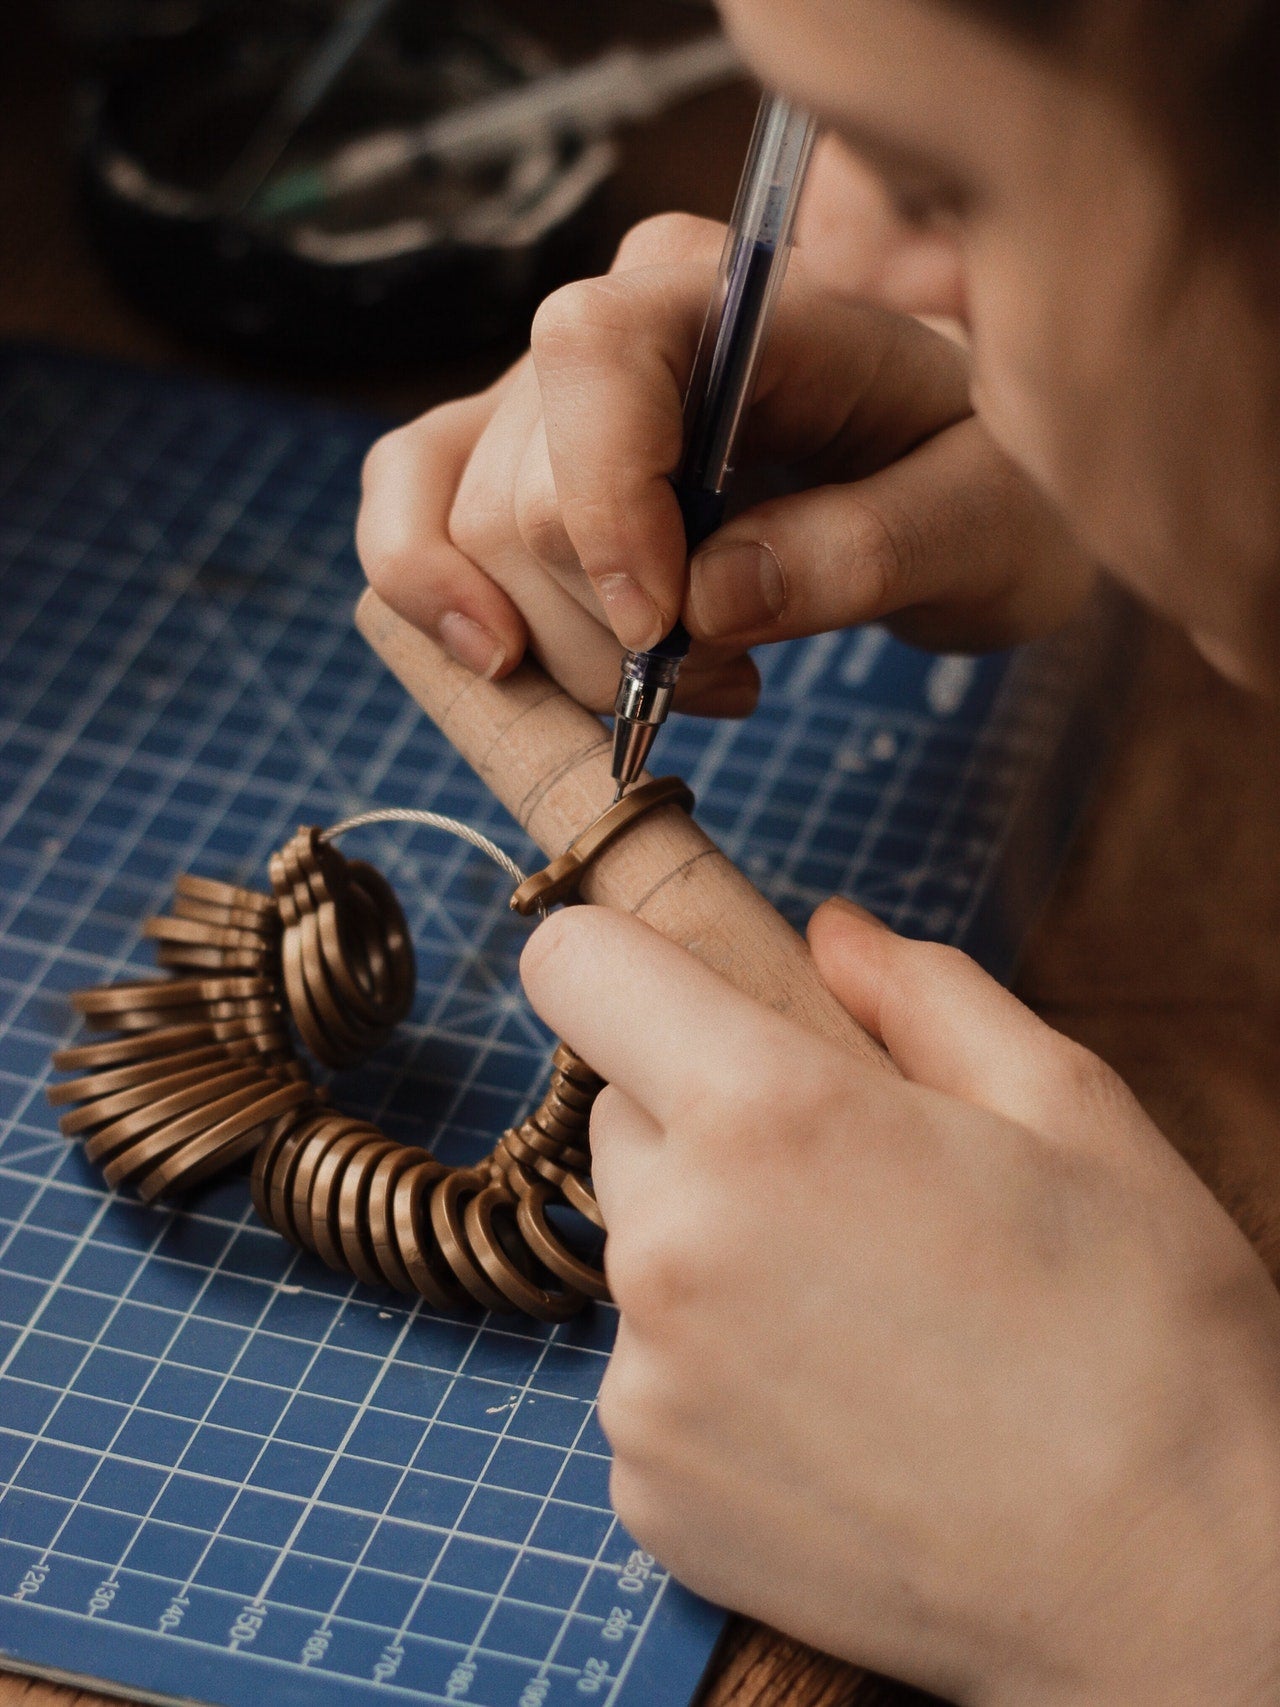 A man using a jeweler's tool for rings